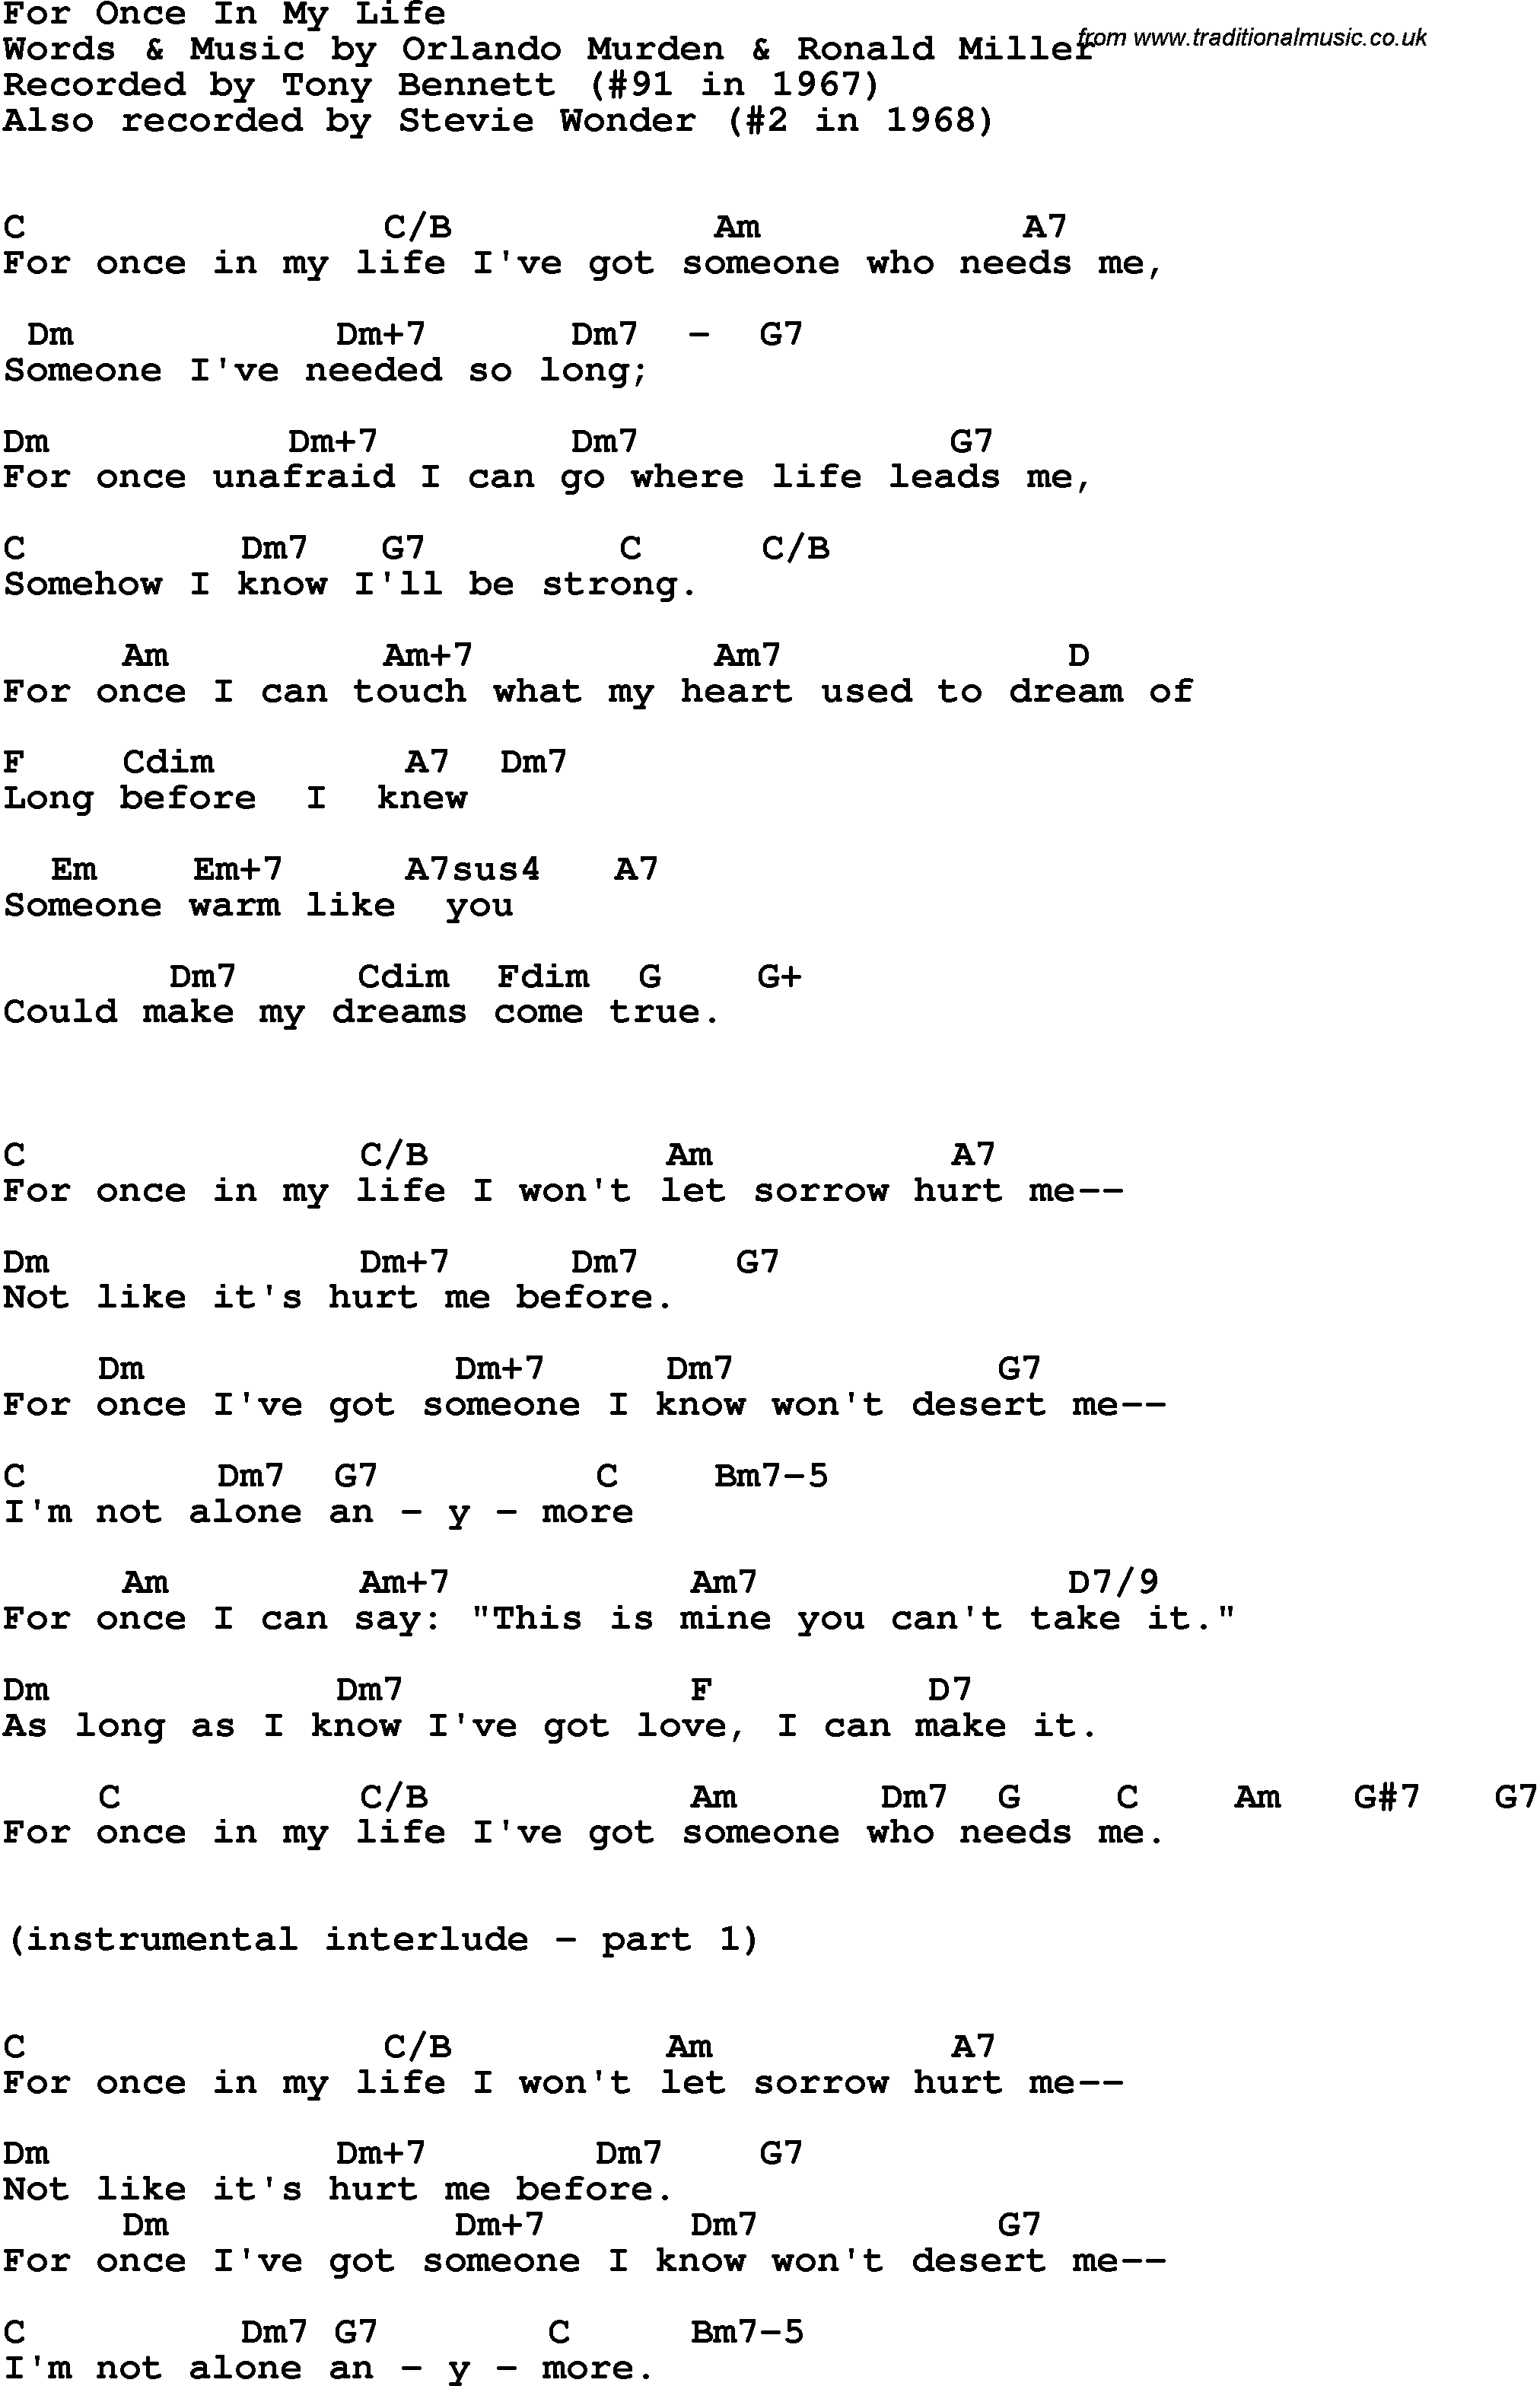 Song Lyrics with guitar chords for For Once In My Life - Tony Bennett, 1967